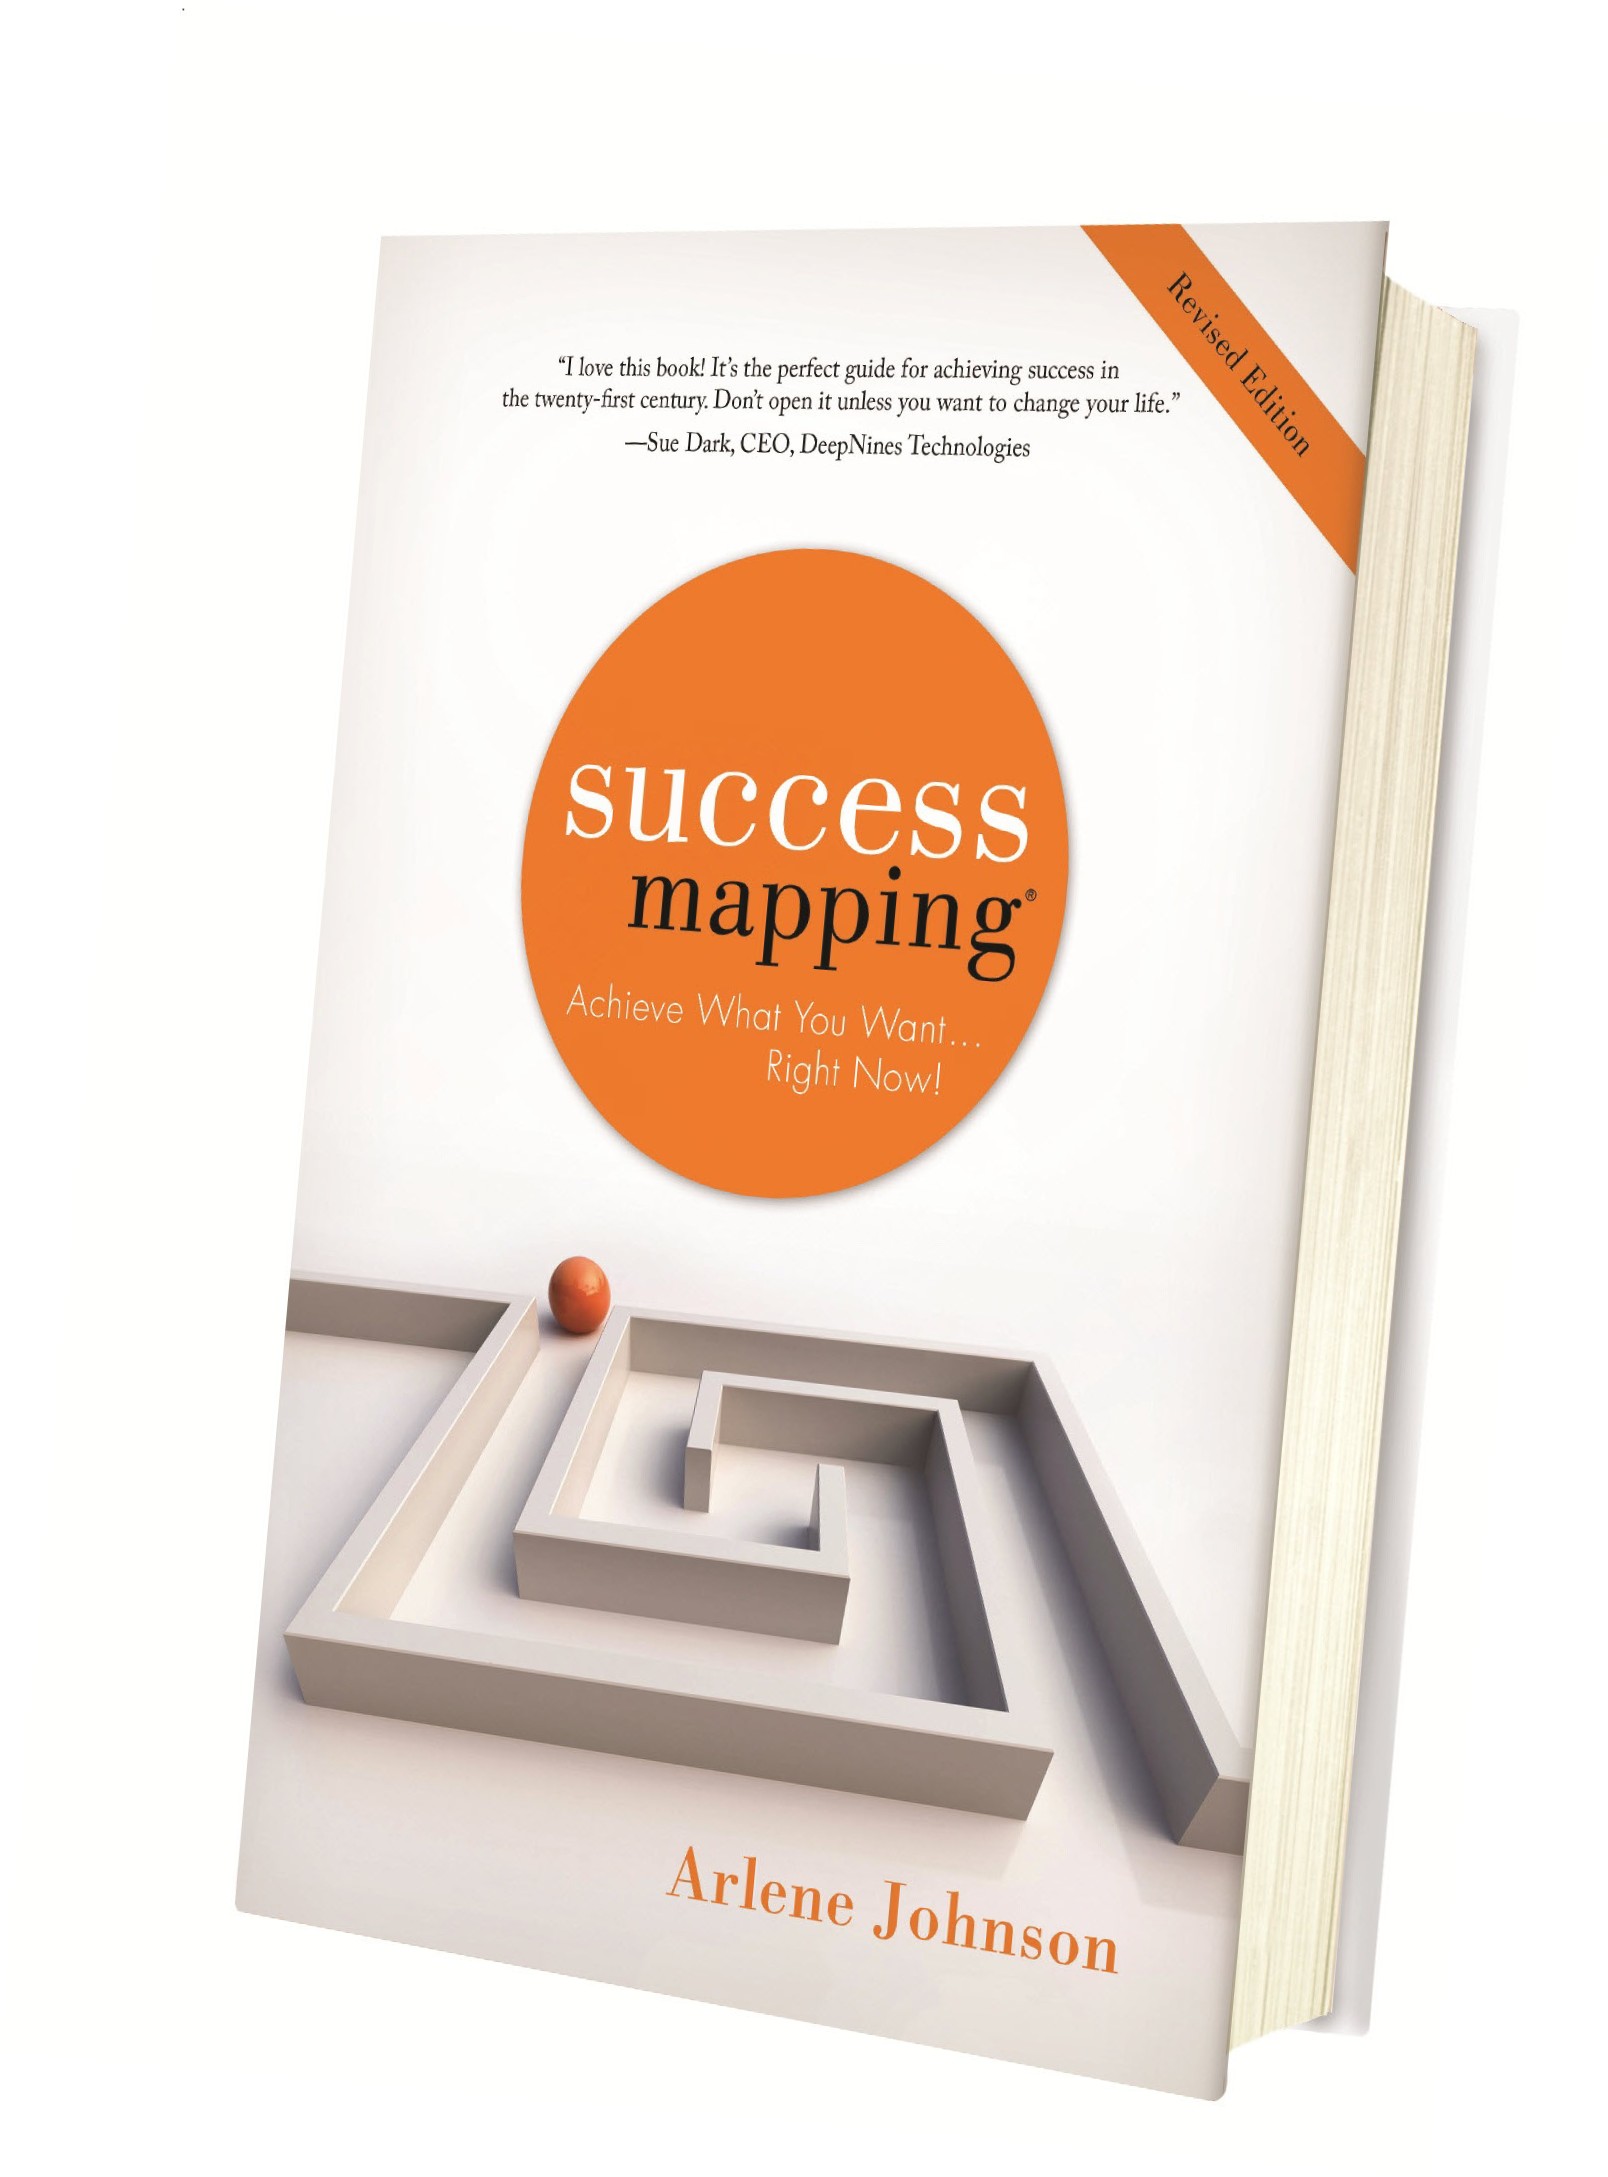 SuccessMapping®: Achieve What You Want Right Now